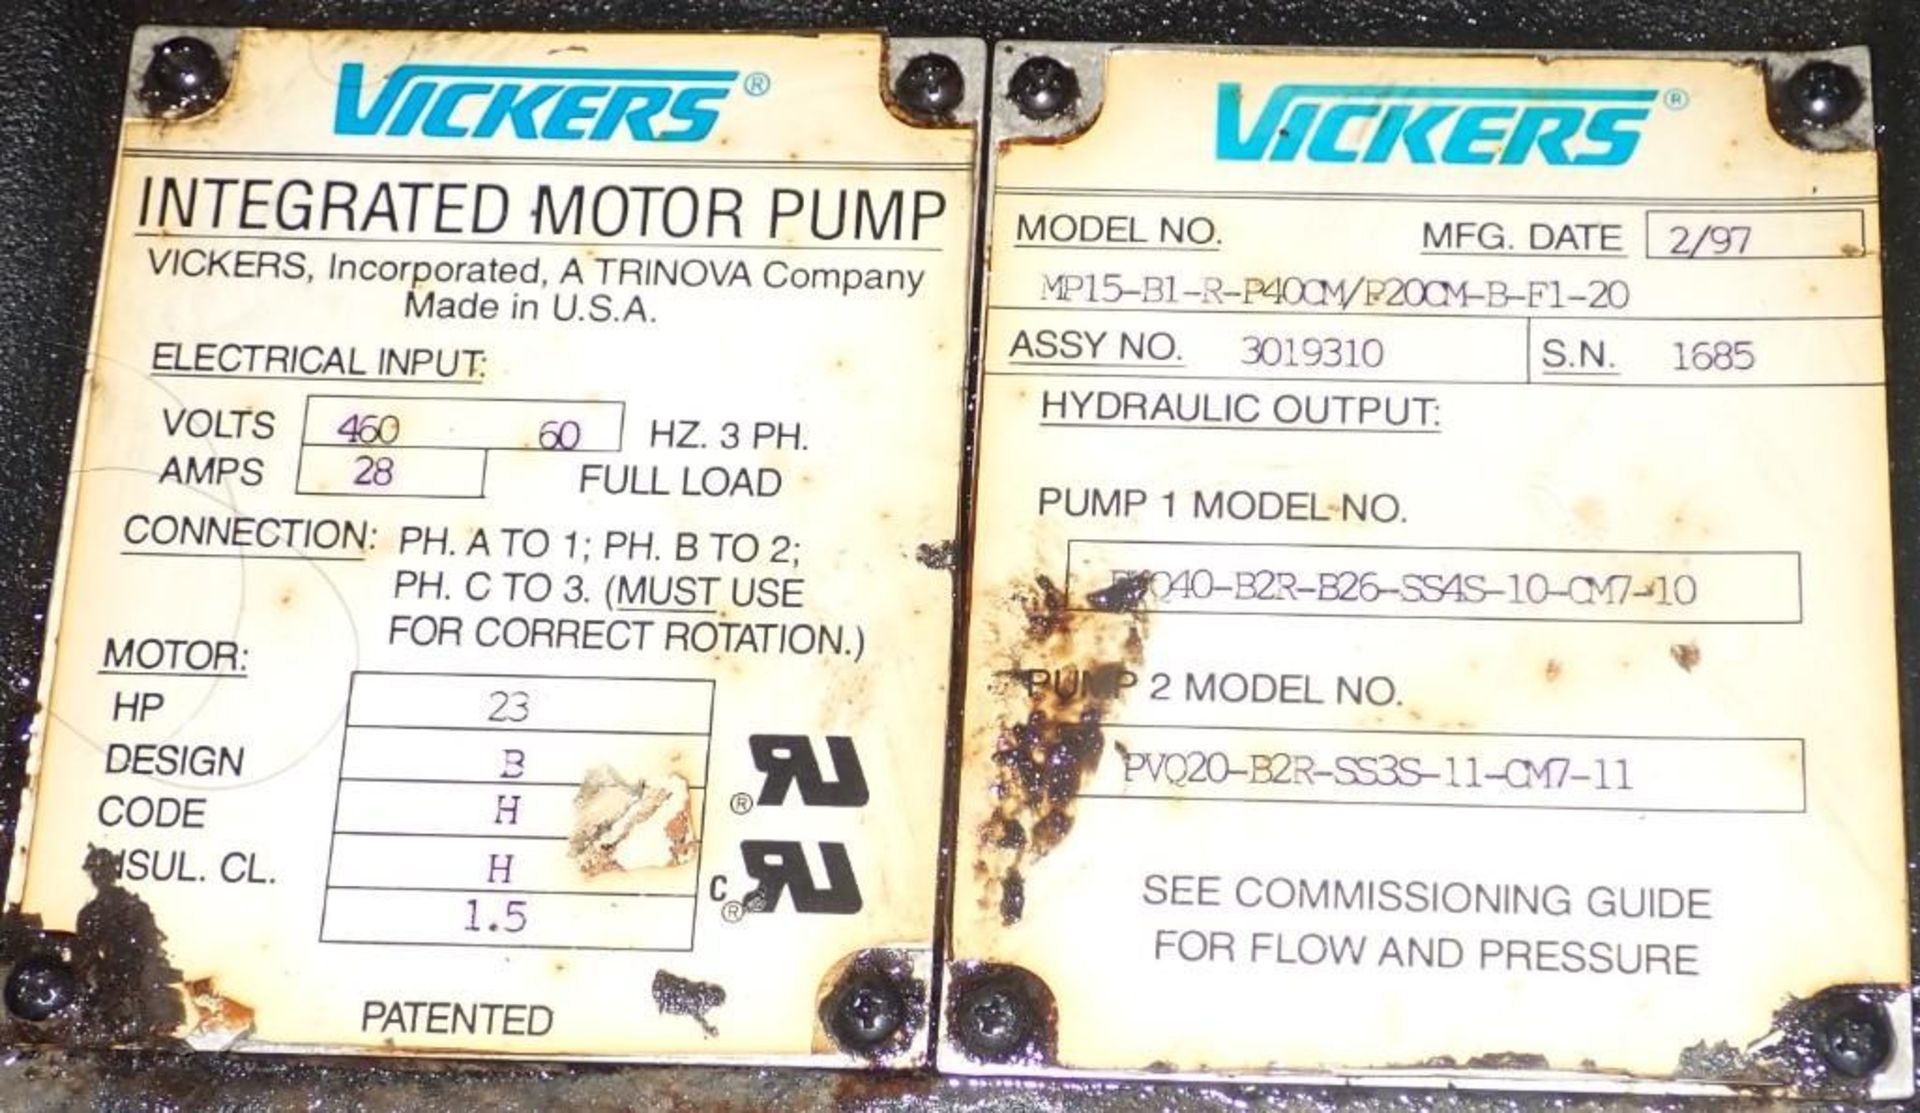 Vickers Integrated Motor Pump #MP15-B1-R-P400M - Image 3 of 3